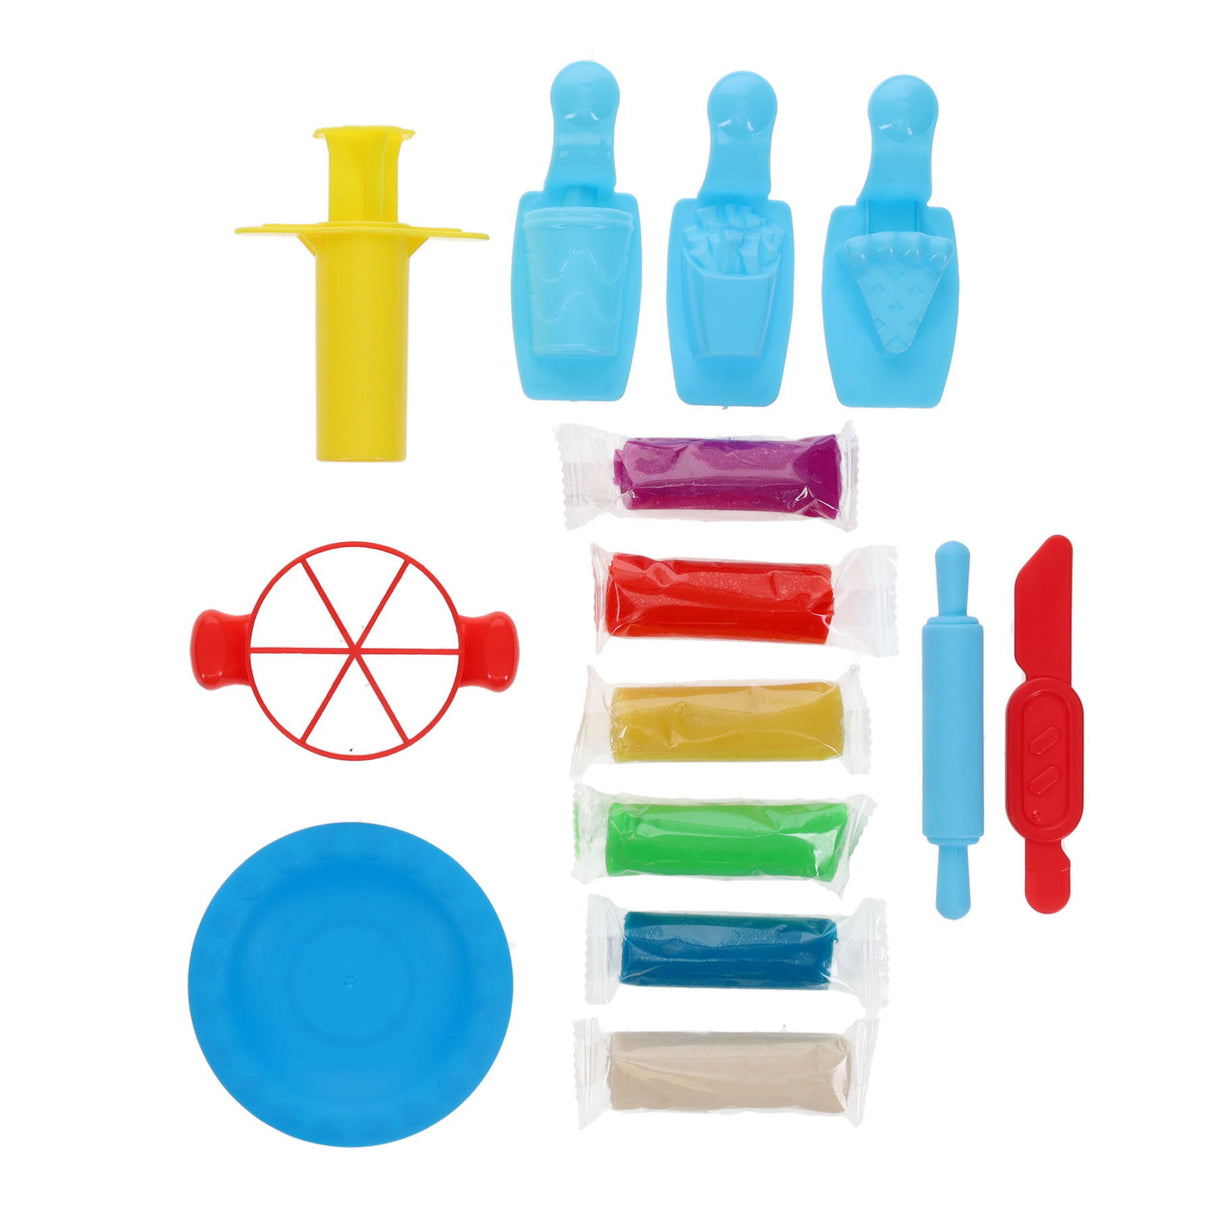 World of Colour The Pizza Dough Play Set - 6 x 20g